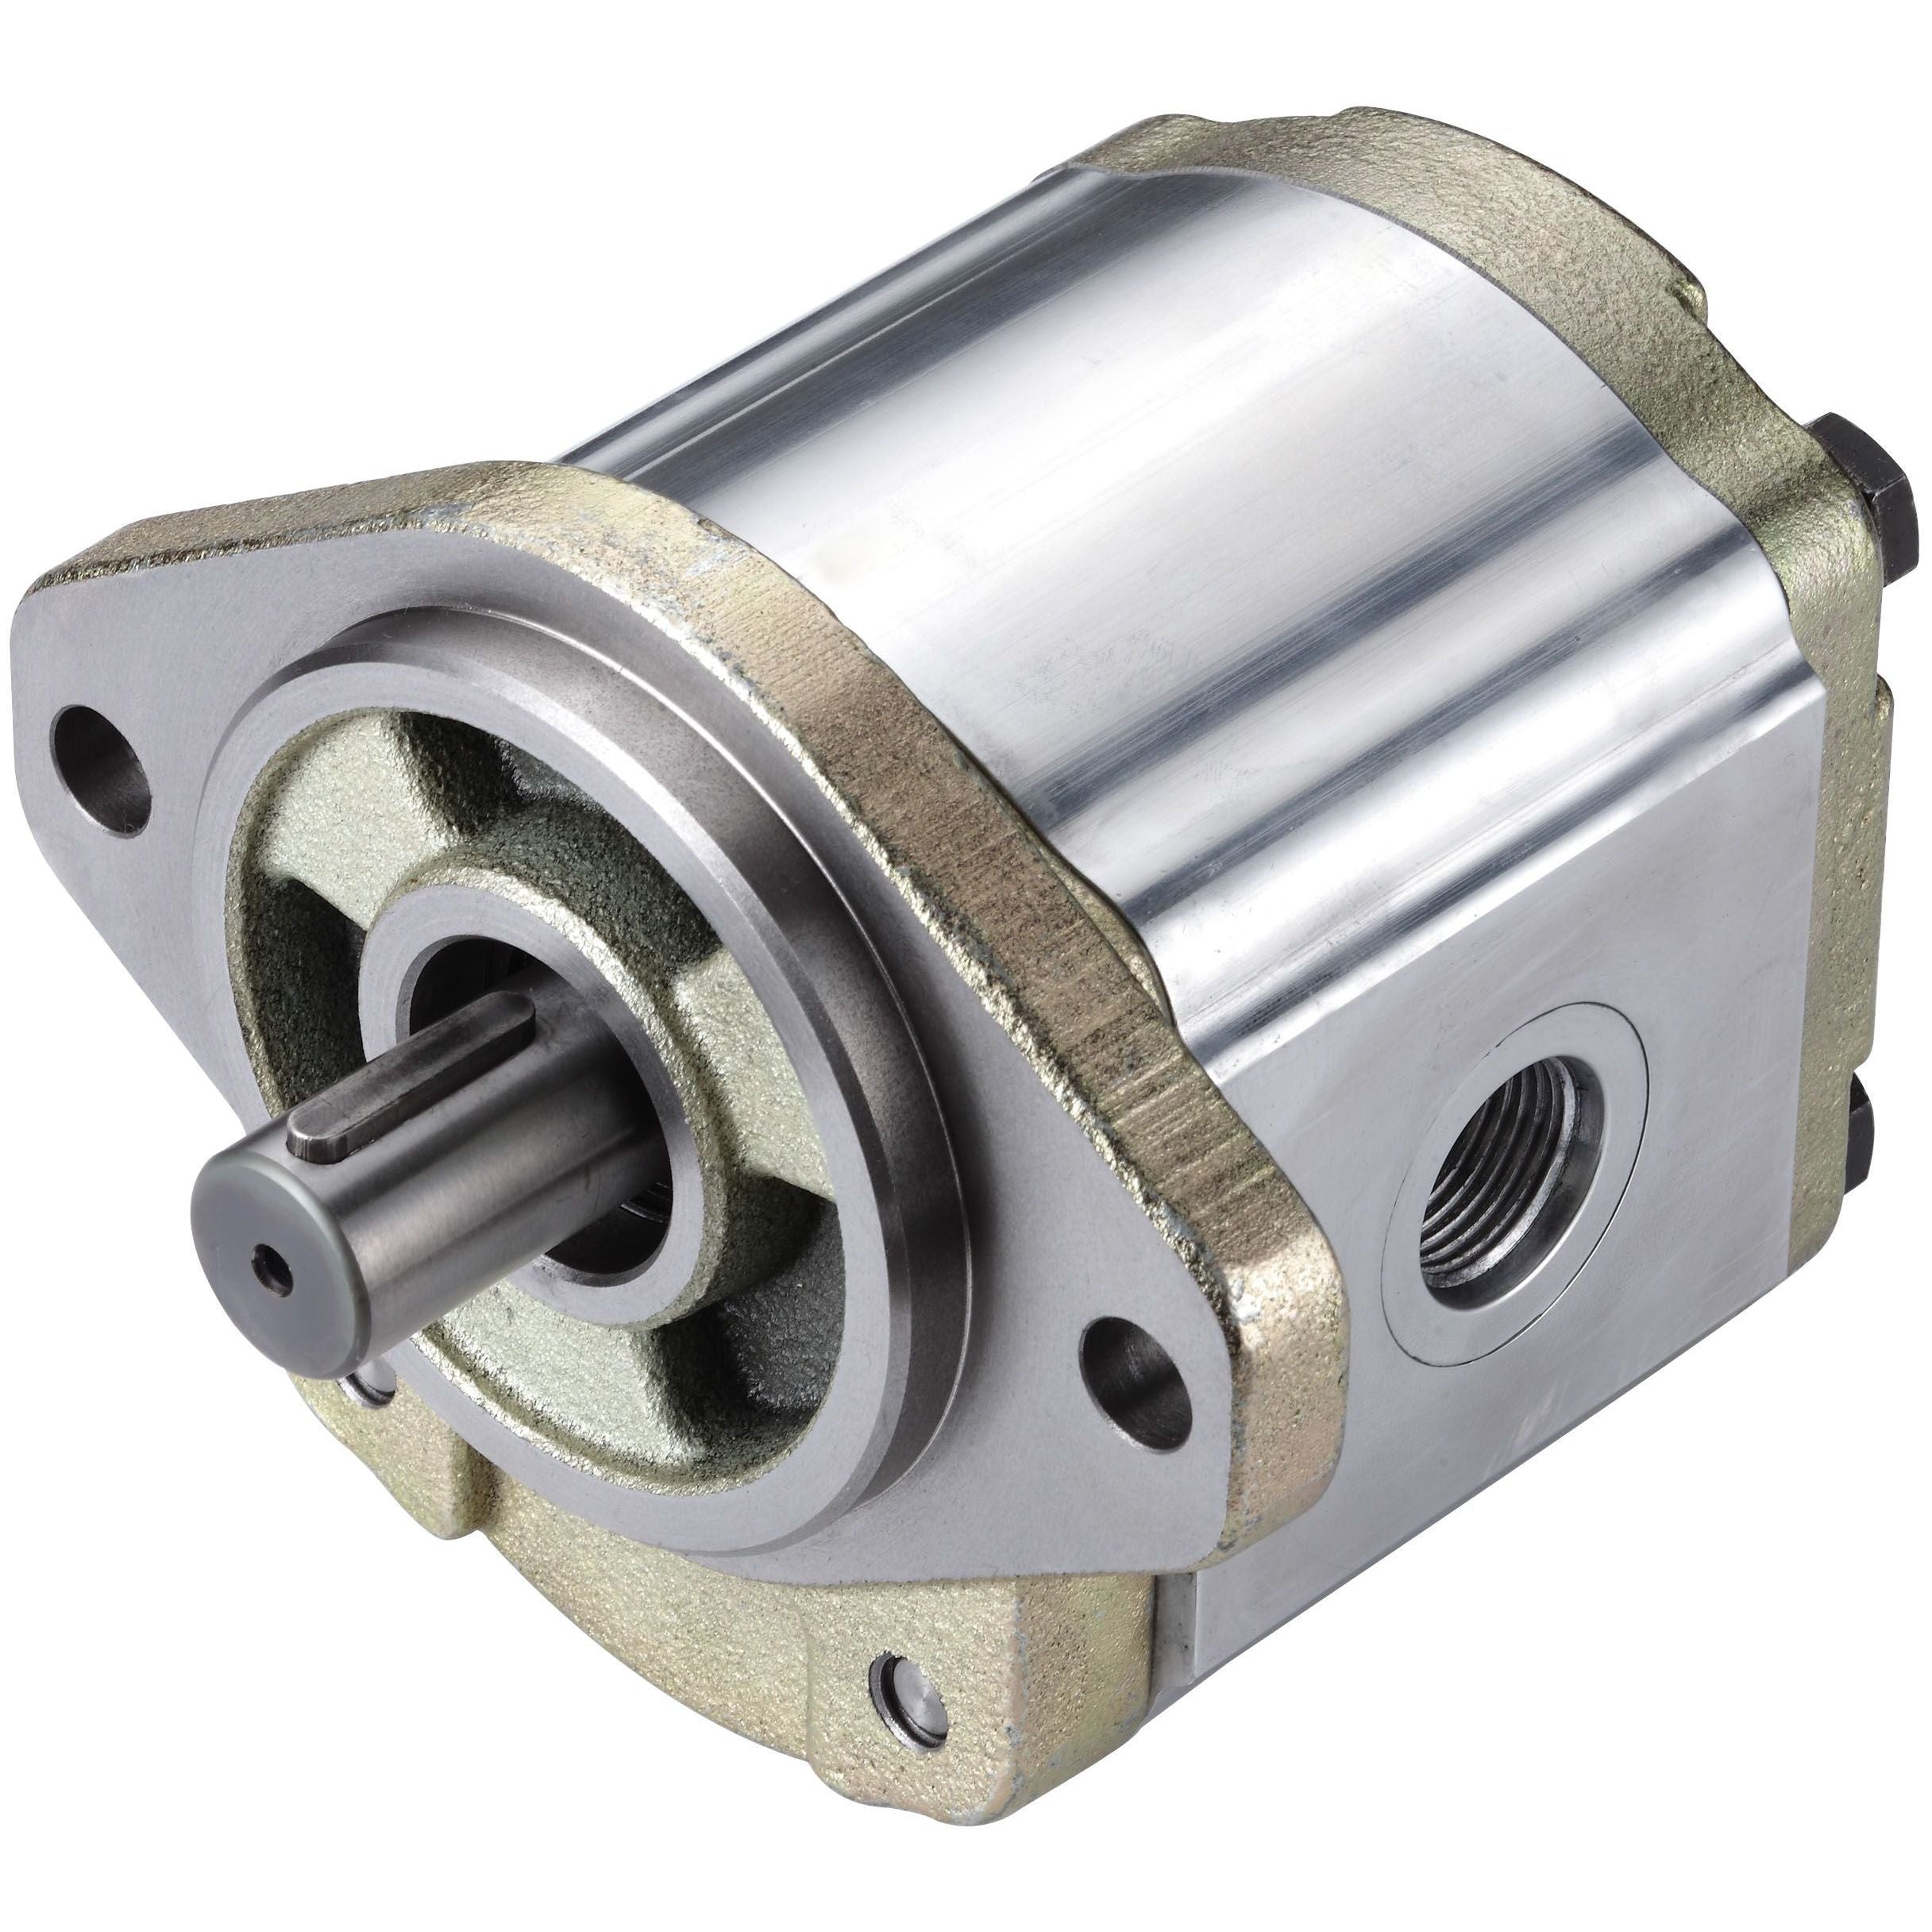 3GA5ZU125L : Honor Gear Pump, CCW Rotation, 25cc (1.53in3), 11.89 GPM, 3500psi, 3000 RPM, #16 SAE (1") In, #12 SAE (3/4") Out, Splined Shaft 11-Tooth, 16/32 Pitch, SAE A 2-Bolt Mount